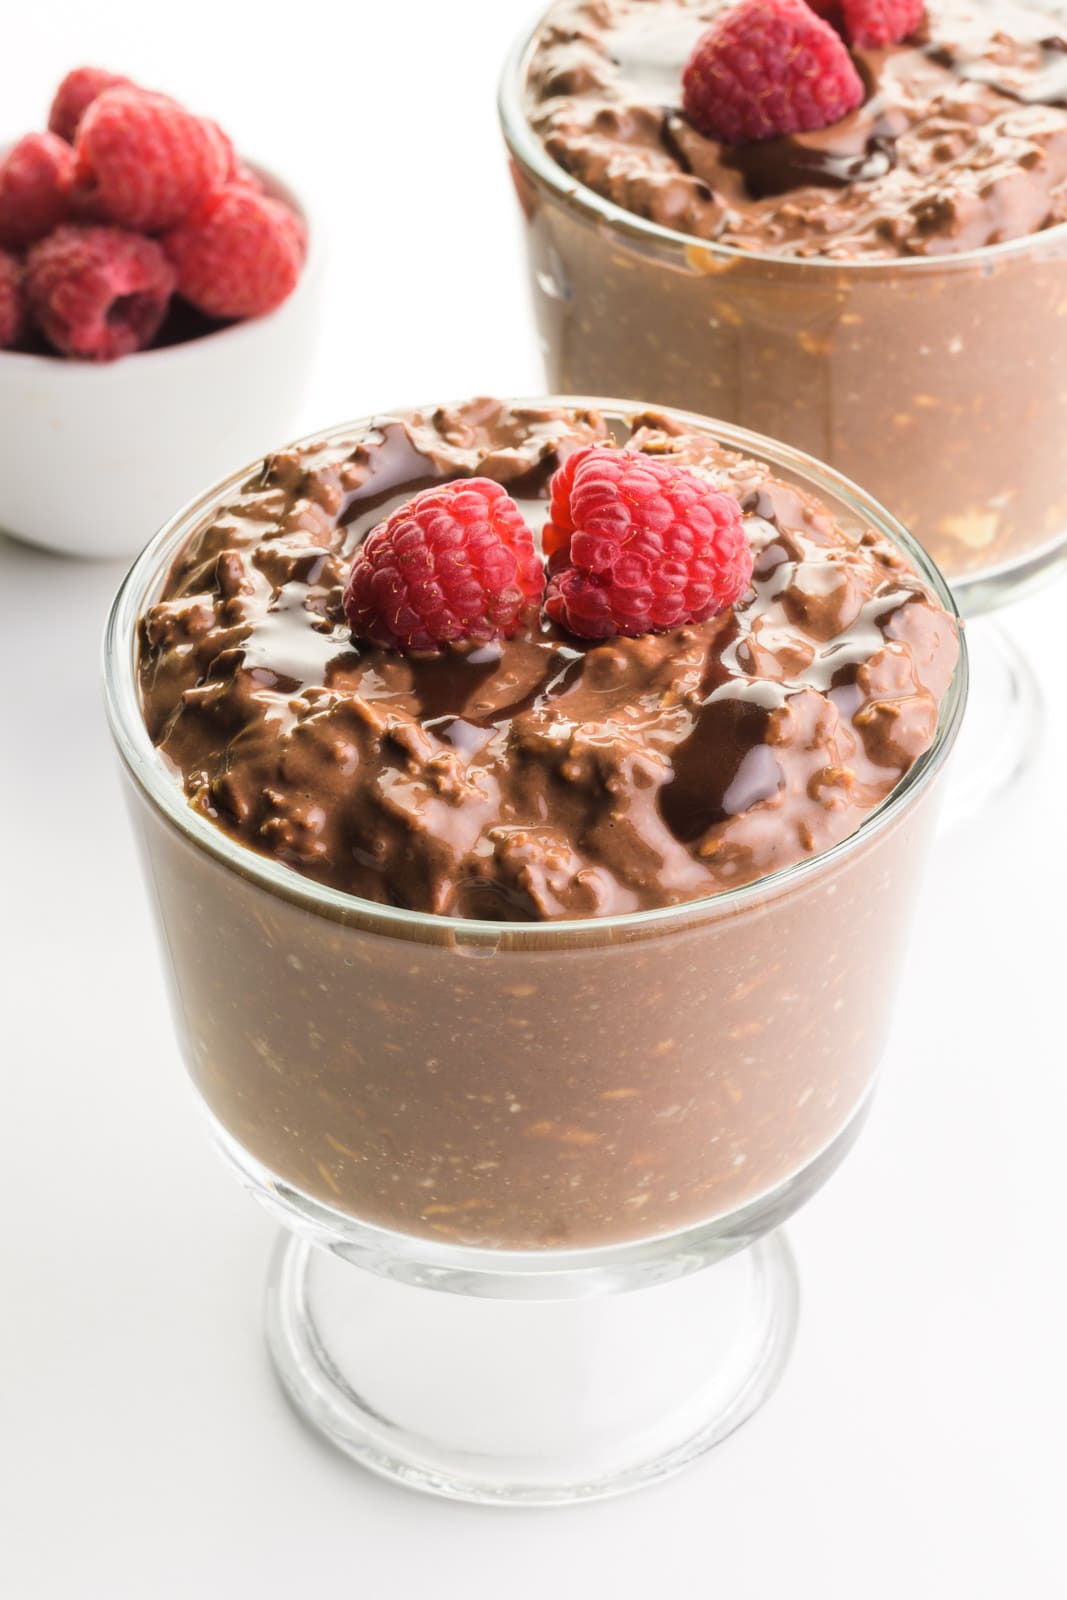 Two bowls of chocolate overnight oats have chocolate syrup and raspberries on top. There is a bowl of raspberries in the background.